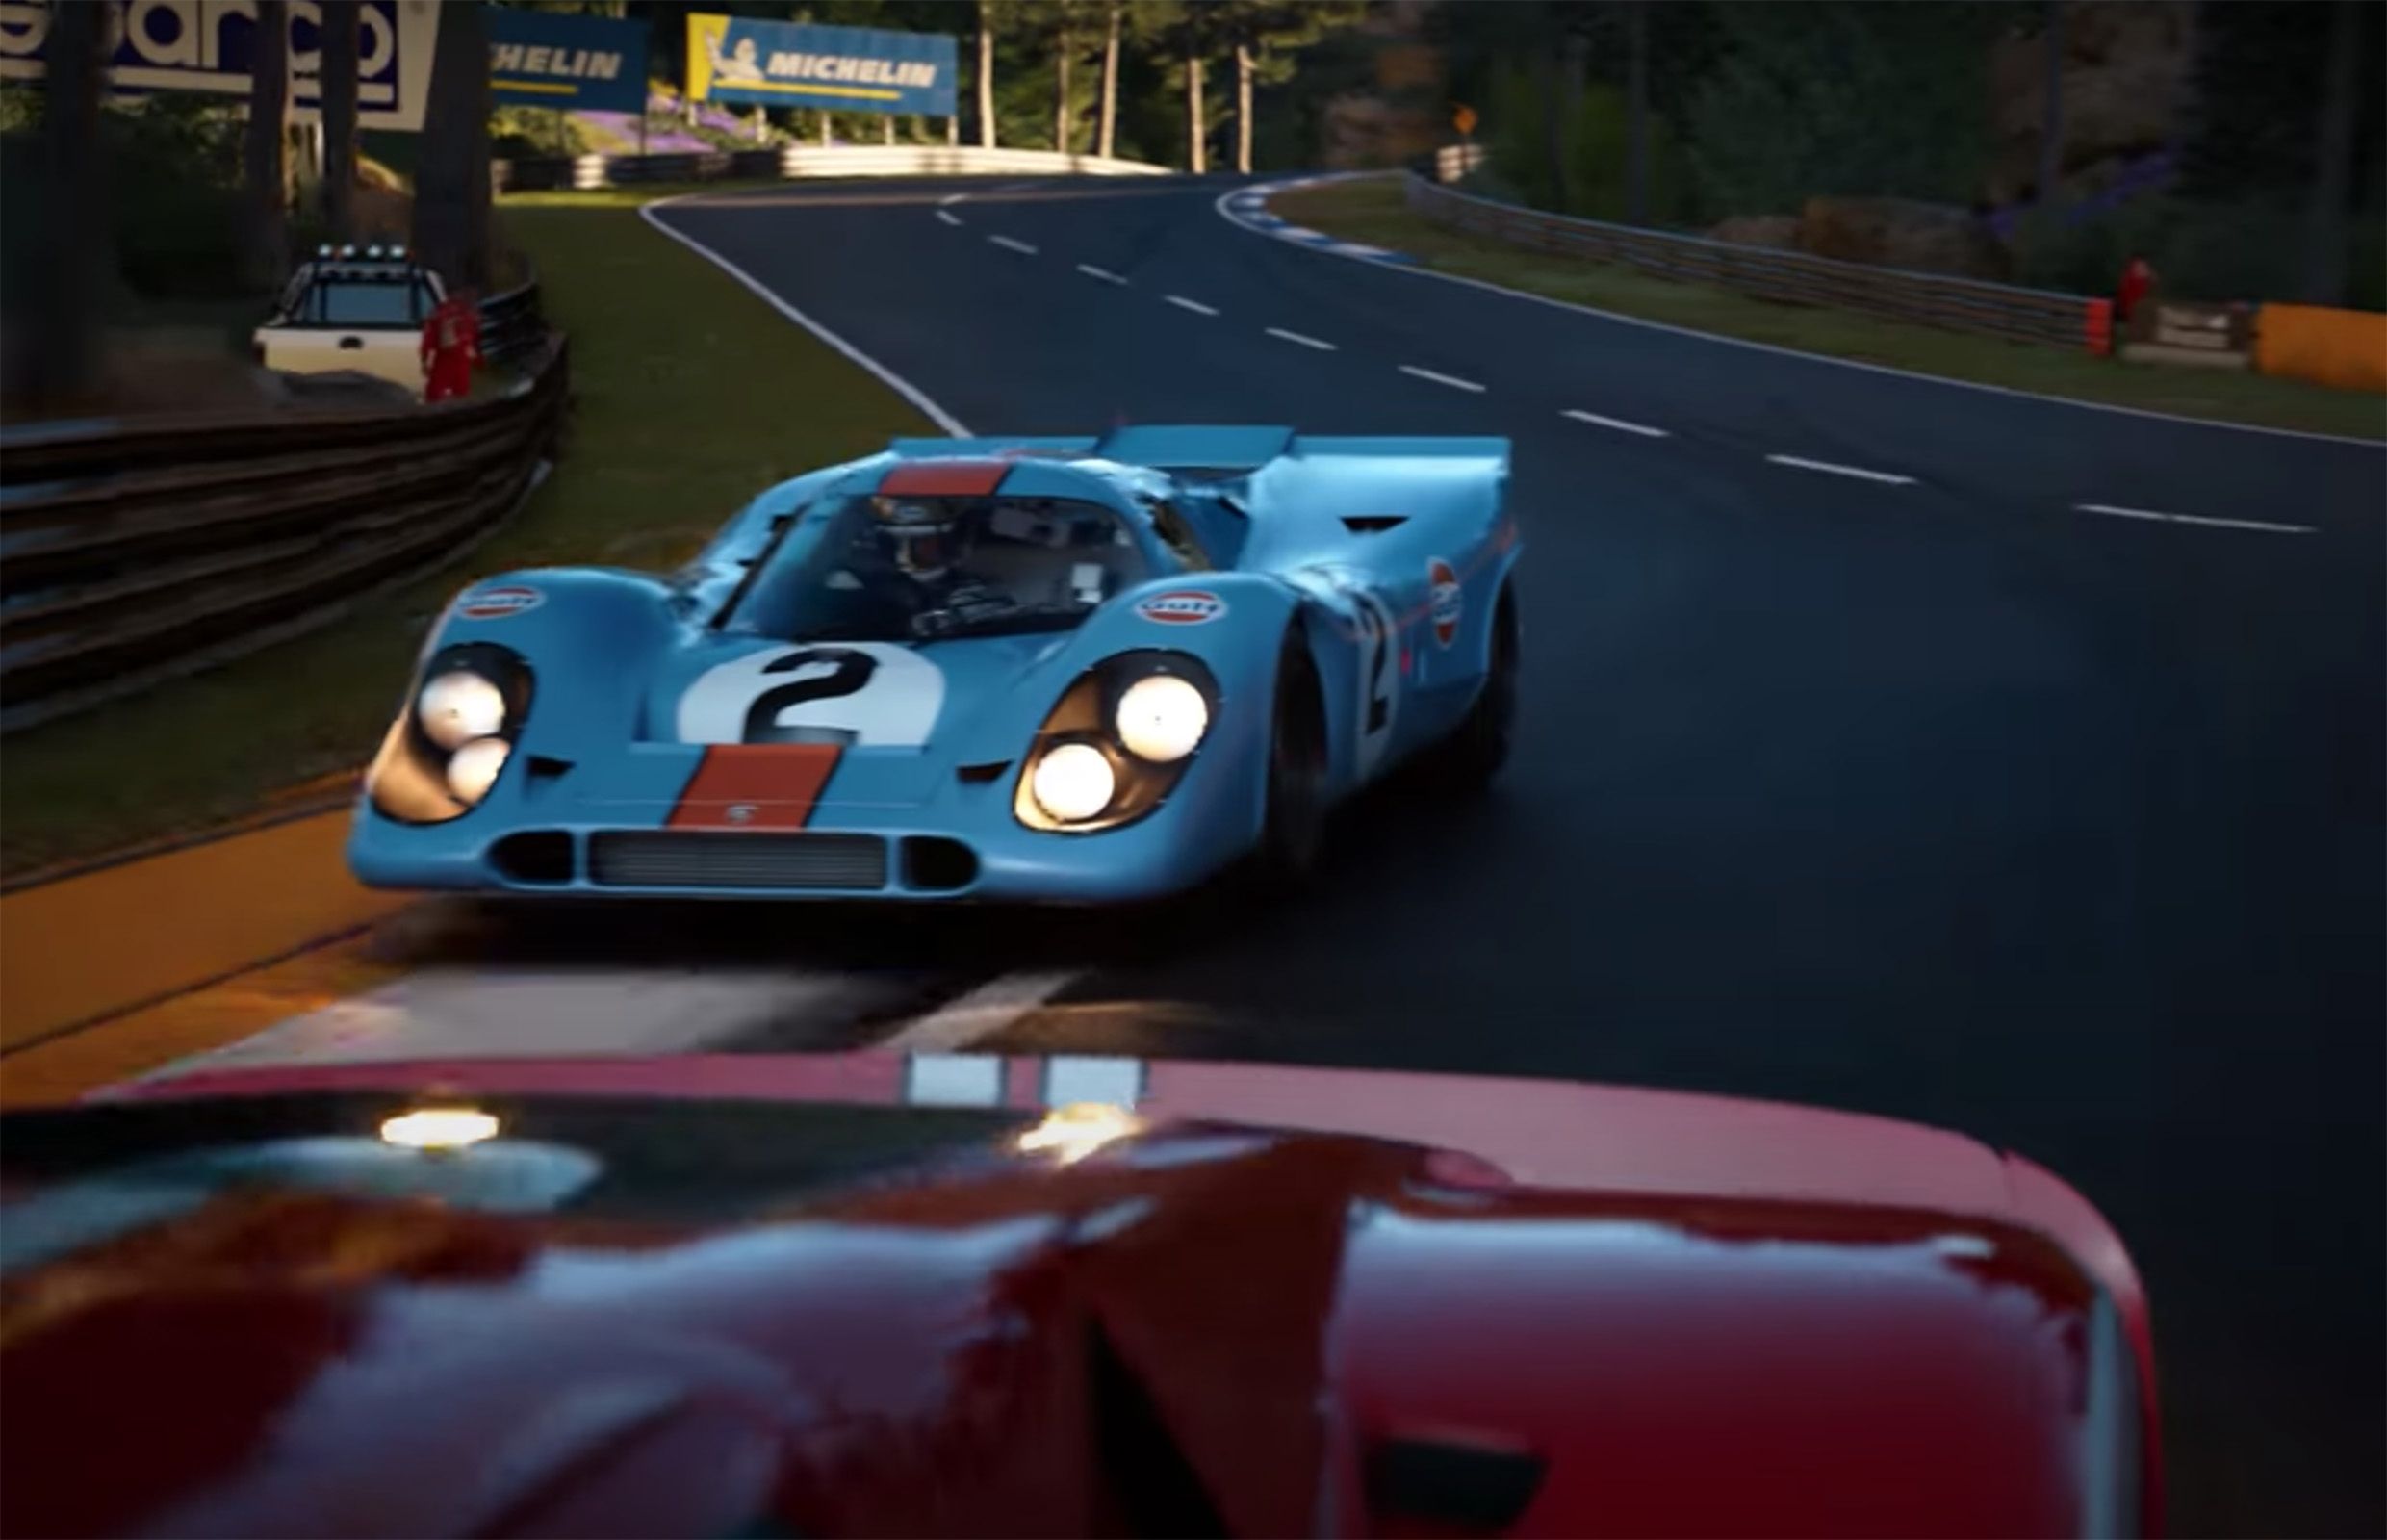 Watch: Trailer shows off new 'Gran Turismo 7' coming to PlayStation 5